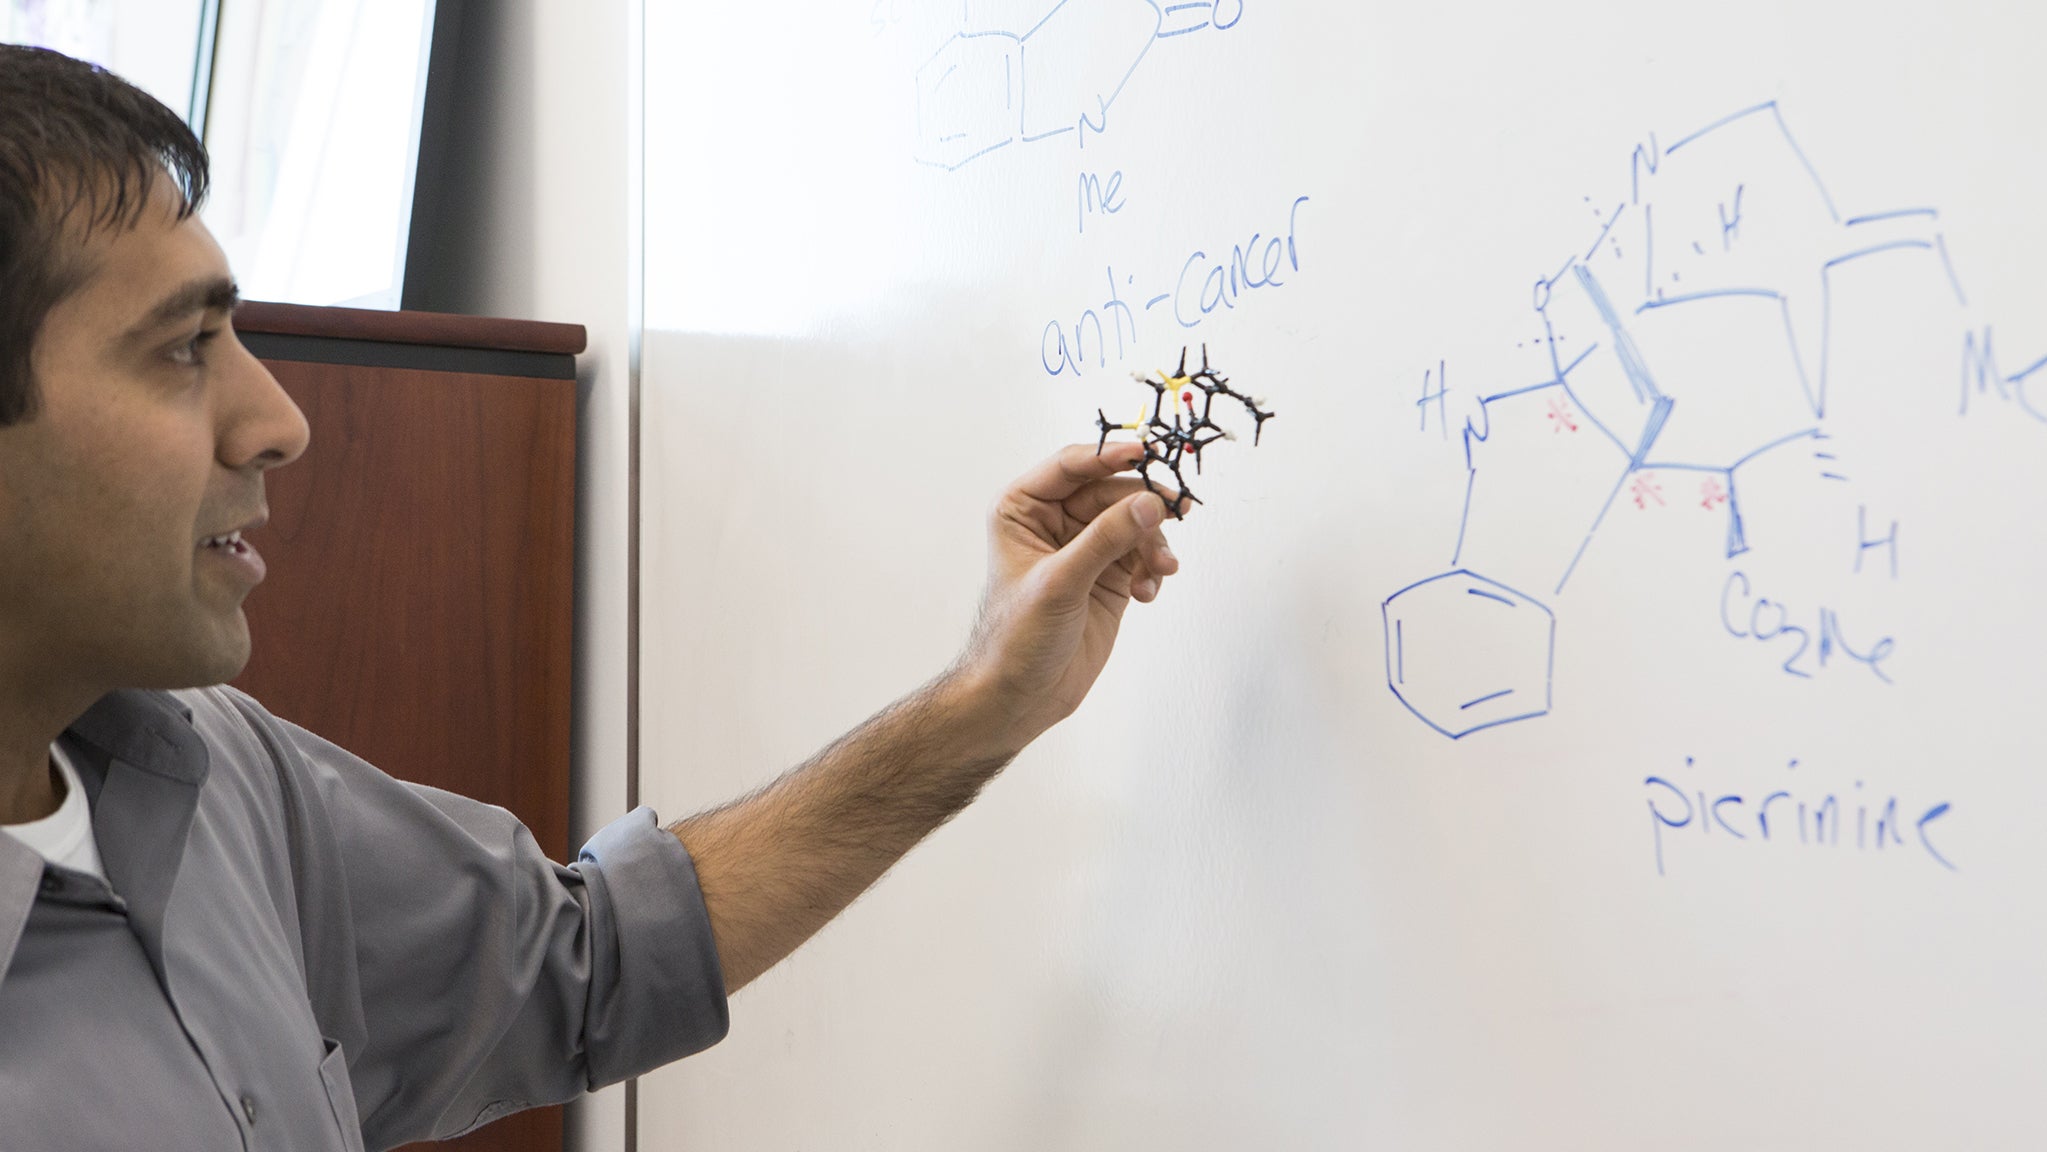 Professor of Chemistry Neil Garg discusses organic in front of a white board.